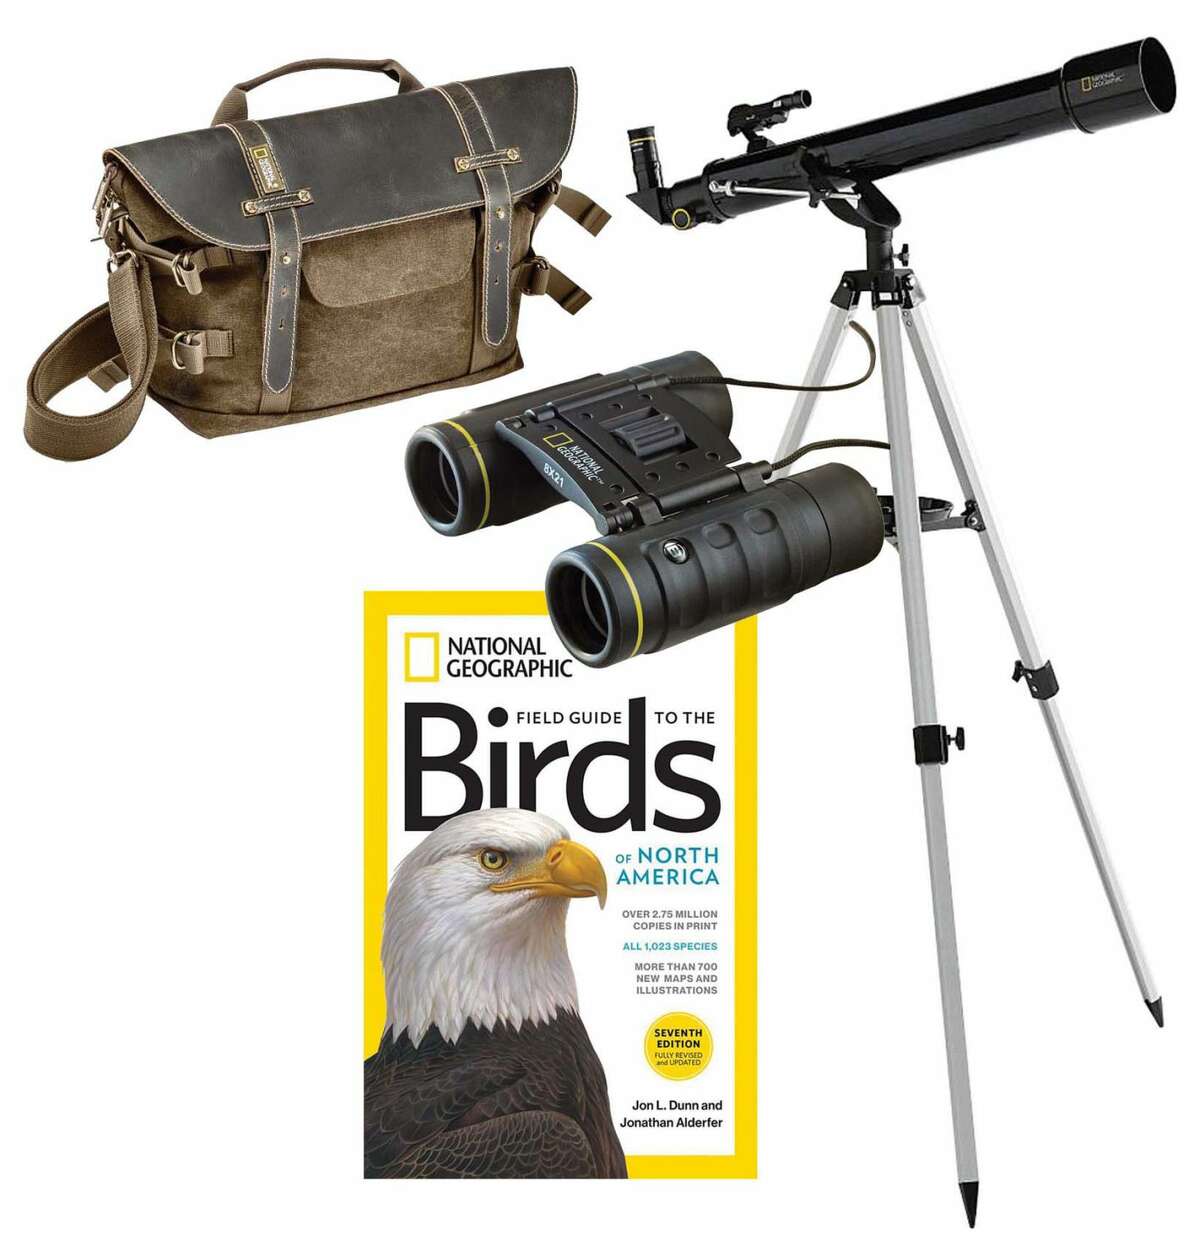 National Geographic Field Guide to the Birds of North America, 7th Edition Best-selling North American bird field guide is the most up-to-date guide on the market. Perfect for beginning to advanced birders. The only book organized to match the latest American Ornithologists' Union taxonomy. With more than 2.75 million copies in print, this perennial bestseller is the most frequently updated of all North American bird field guides. Filled with hand-painted illustrations from top nature artists, this latest edition is poised to become an instant must-have for every serious birder in the United States and Canada. The 7th edition includes 37 new species for a total of 1,023 species. Sixteen new pages allow for 250 fresh illustrations, 80 new maps, and 350 map revisions. With taxonomy updated to recent significant scientific rearrangement, the addition of standardized banding codes, and text completely vetted by birding experts, this new edition will stand at the top of the list of birding field guides for years to come. $29.95, National Geographic Books, natgeostore.com National Geographic Africa Midi Satchel Attractive, rugged, and designed especially for National Geographic explorers, this camera bag is durable enough for the most demanding photographer. Carry and protect your DSLR camera or camcorder in a convenient, removable padded insert. Made of water-repellent cotton and coated with polyurethane, this bag can accommodate a netbook computer with a screen of up to 9 inches. The easy-access pockets for accessories and a halfway modular divider let you can customize the satchel to best suit your individual adventuring needs. The bag includes a handle and thick shoulder straps for dual carrying options, and a bright ochre-colored lining. $139, National Geographic, natgeostore.com National Geographic 8 x 21...